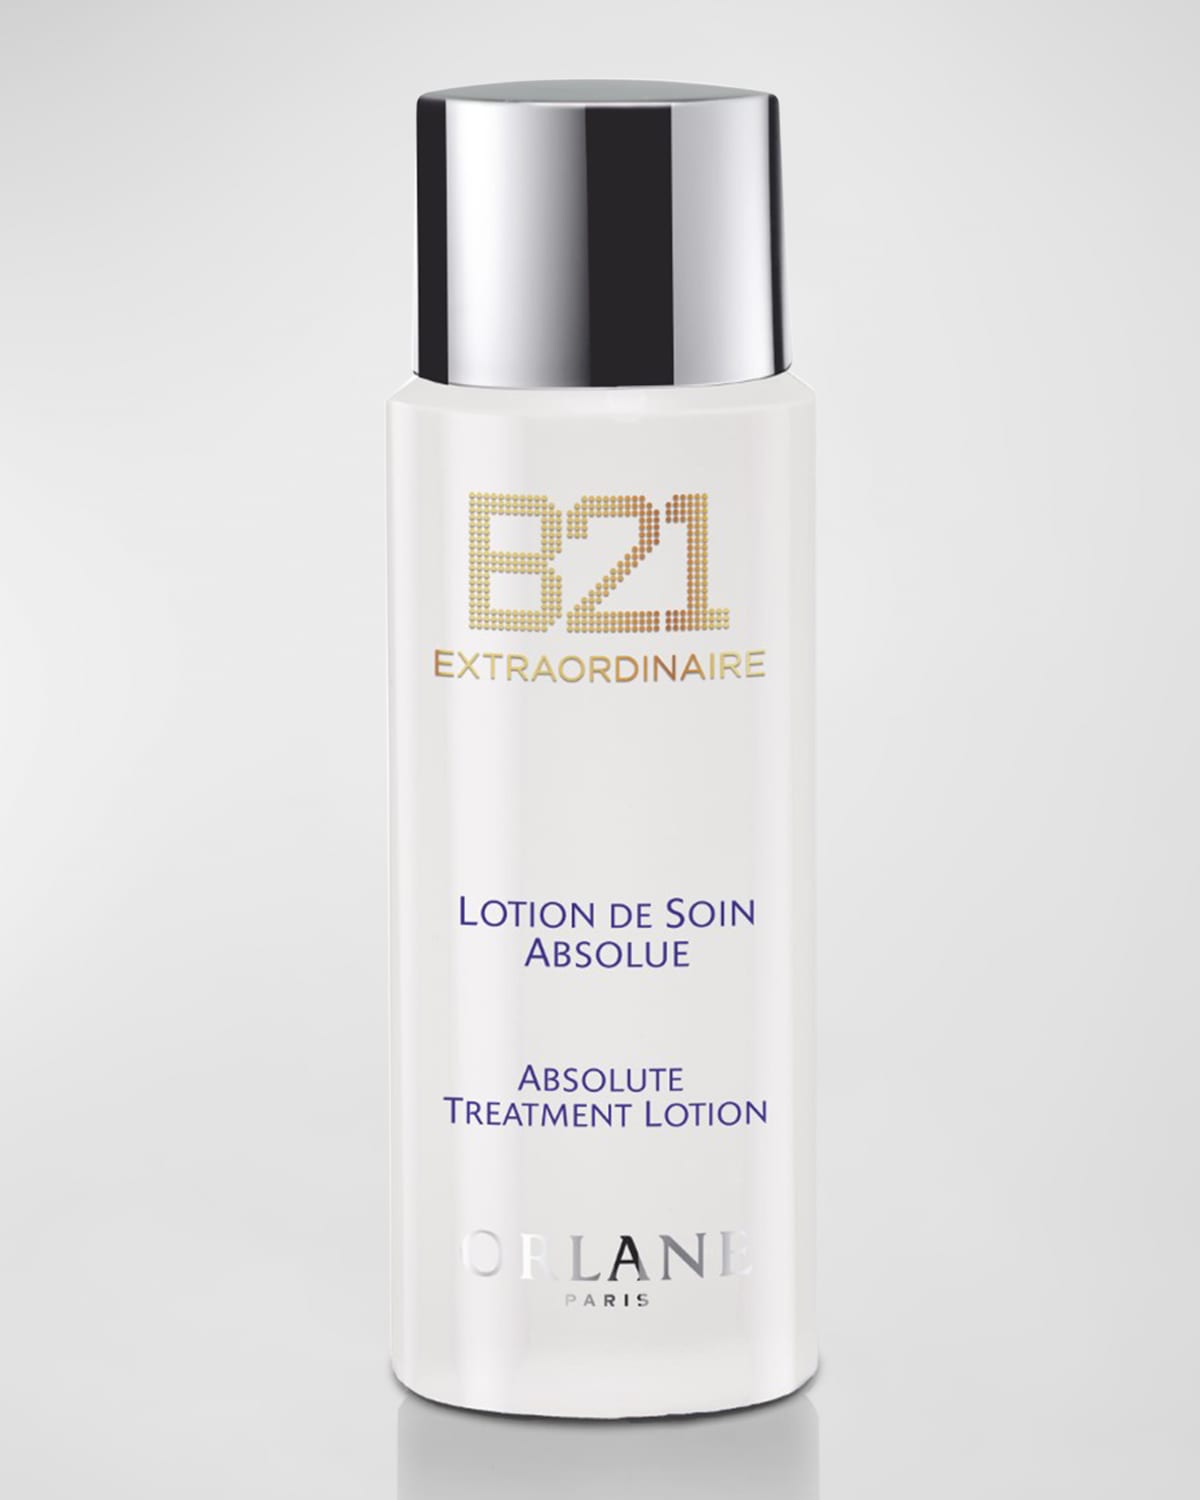 B21 Extraordinaire Absolute Treatment Lotion, Yours with any $100 Orlane Purchase